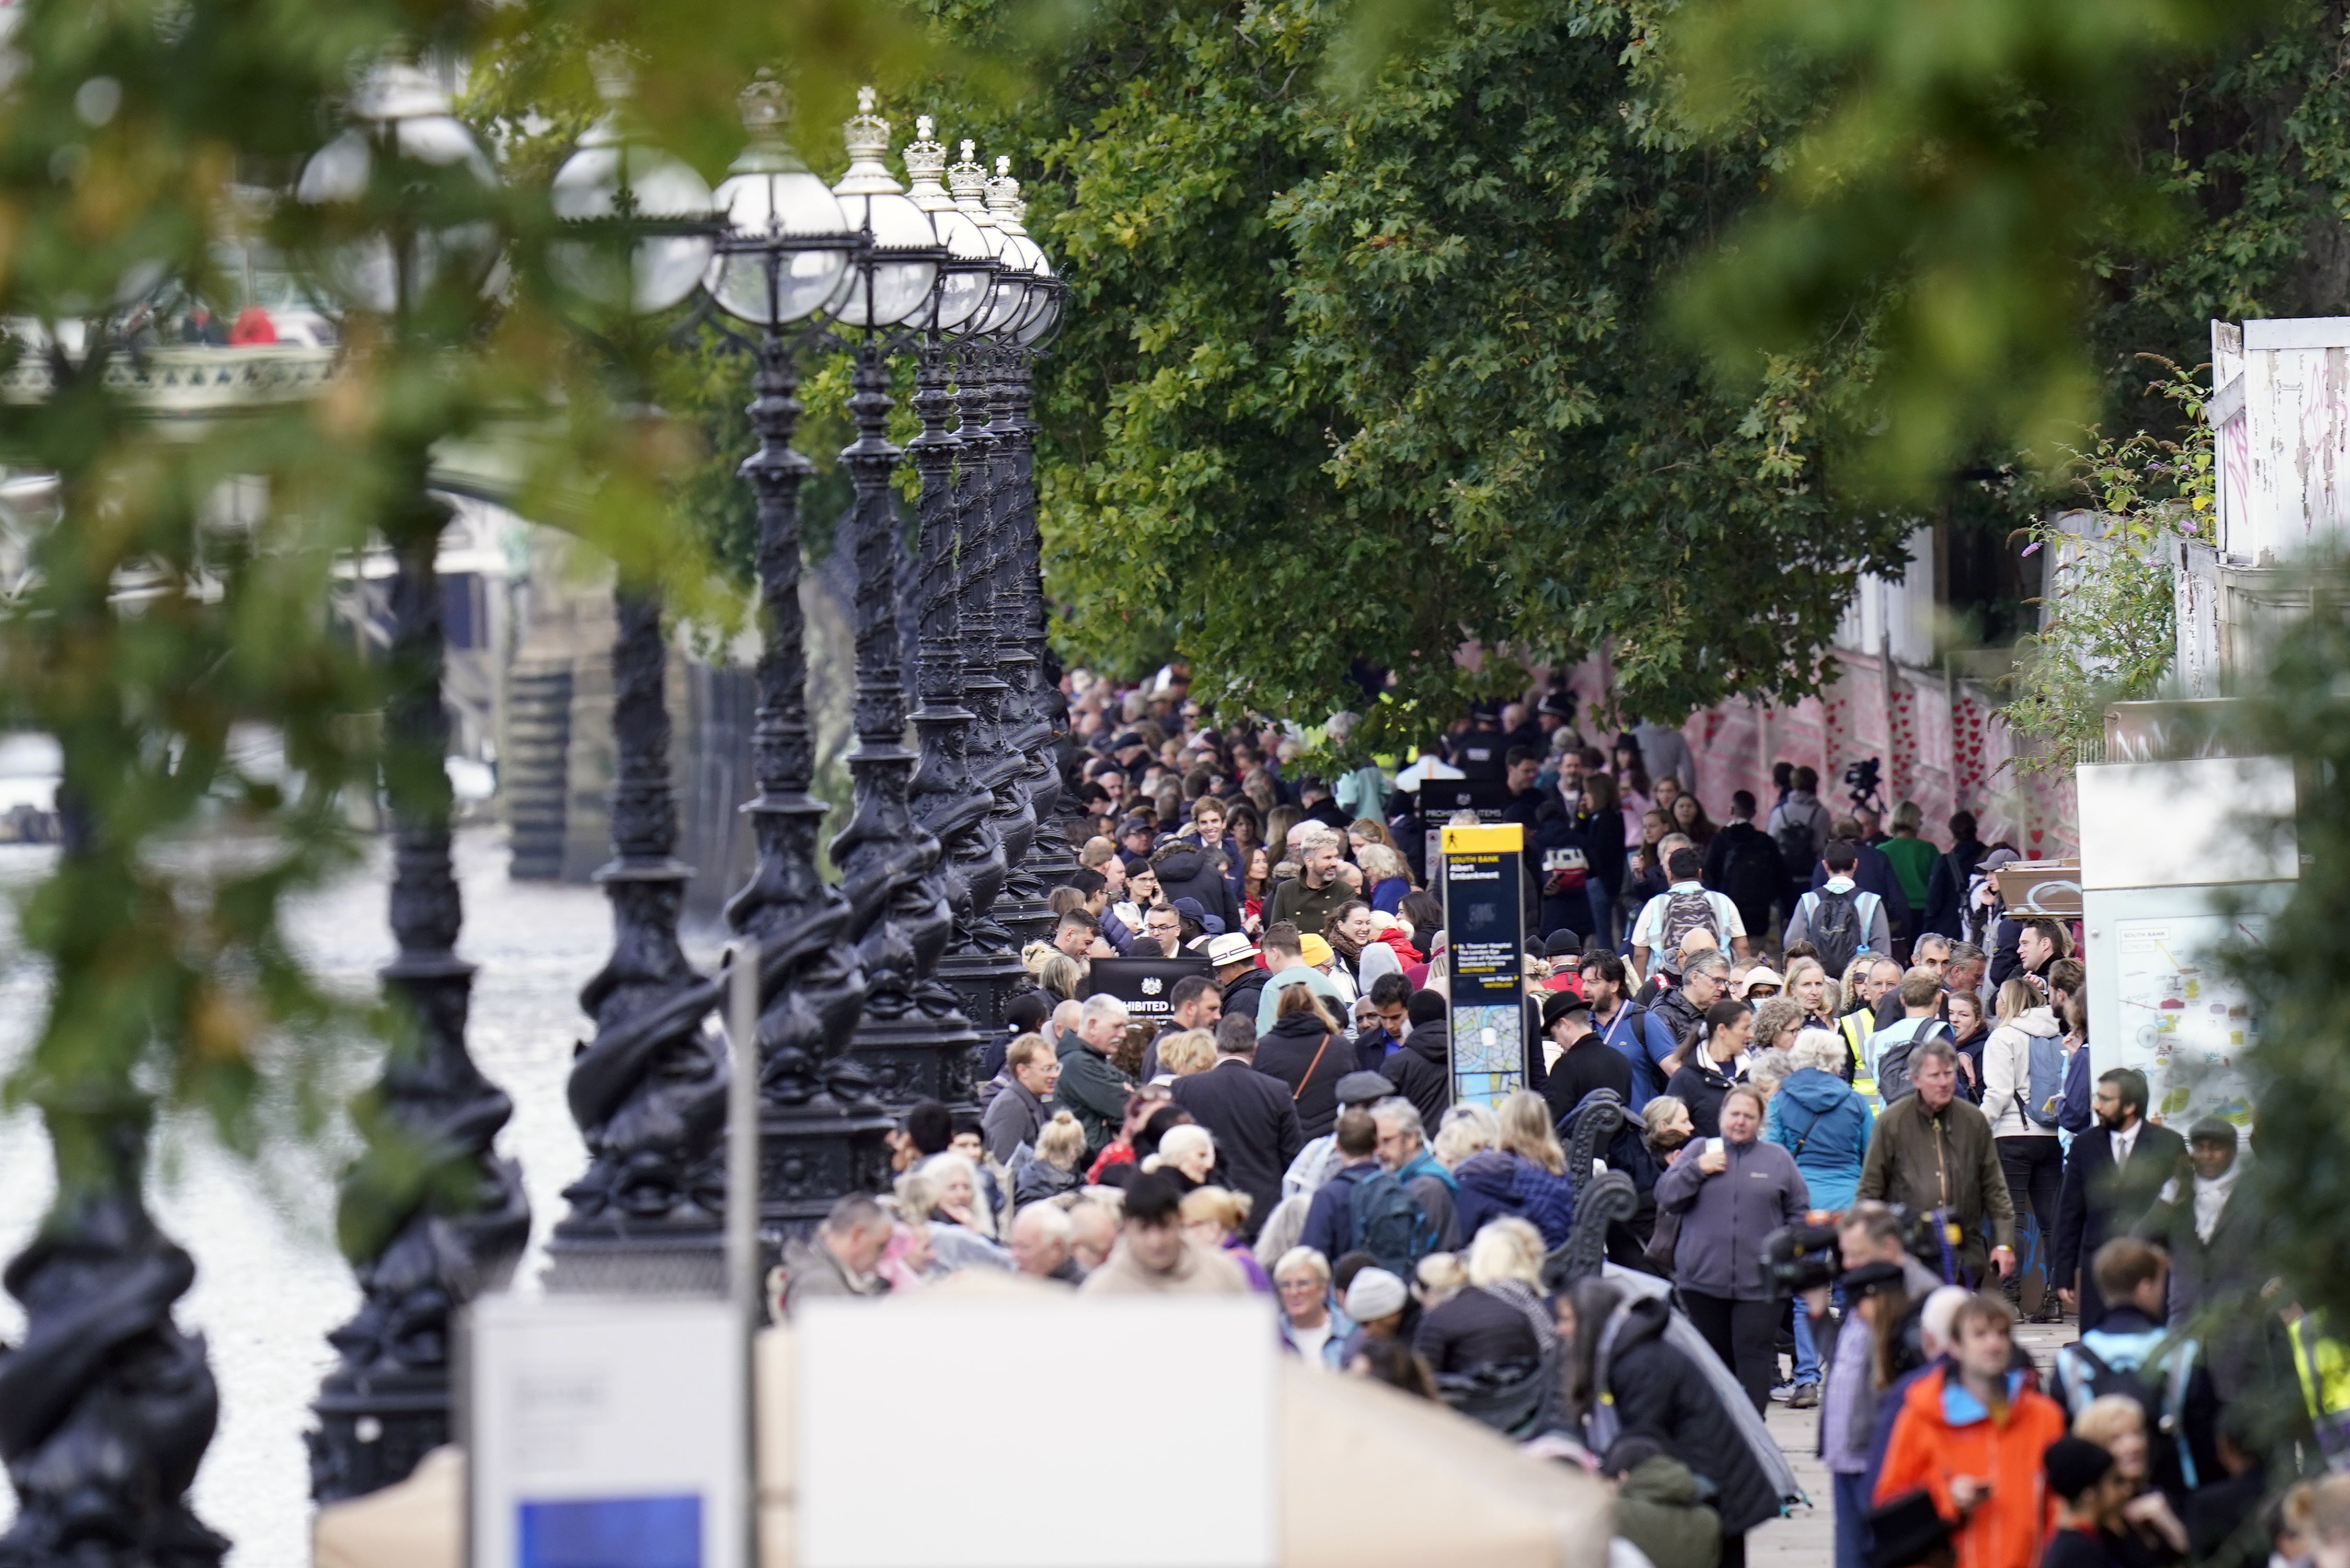 Central London is set to be very busy in the build-up to the funeral (Danny Lawson/PA)